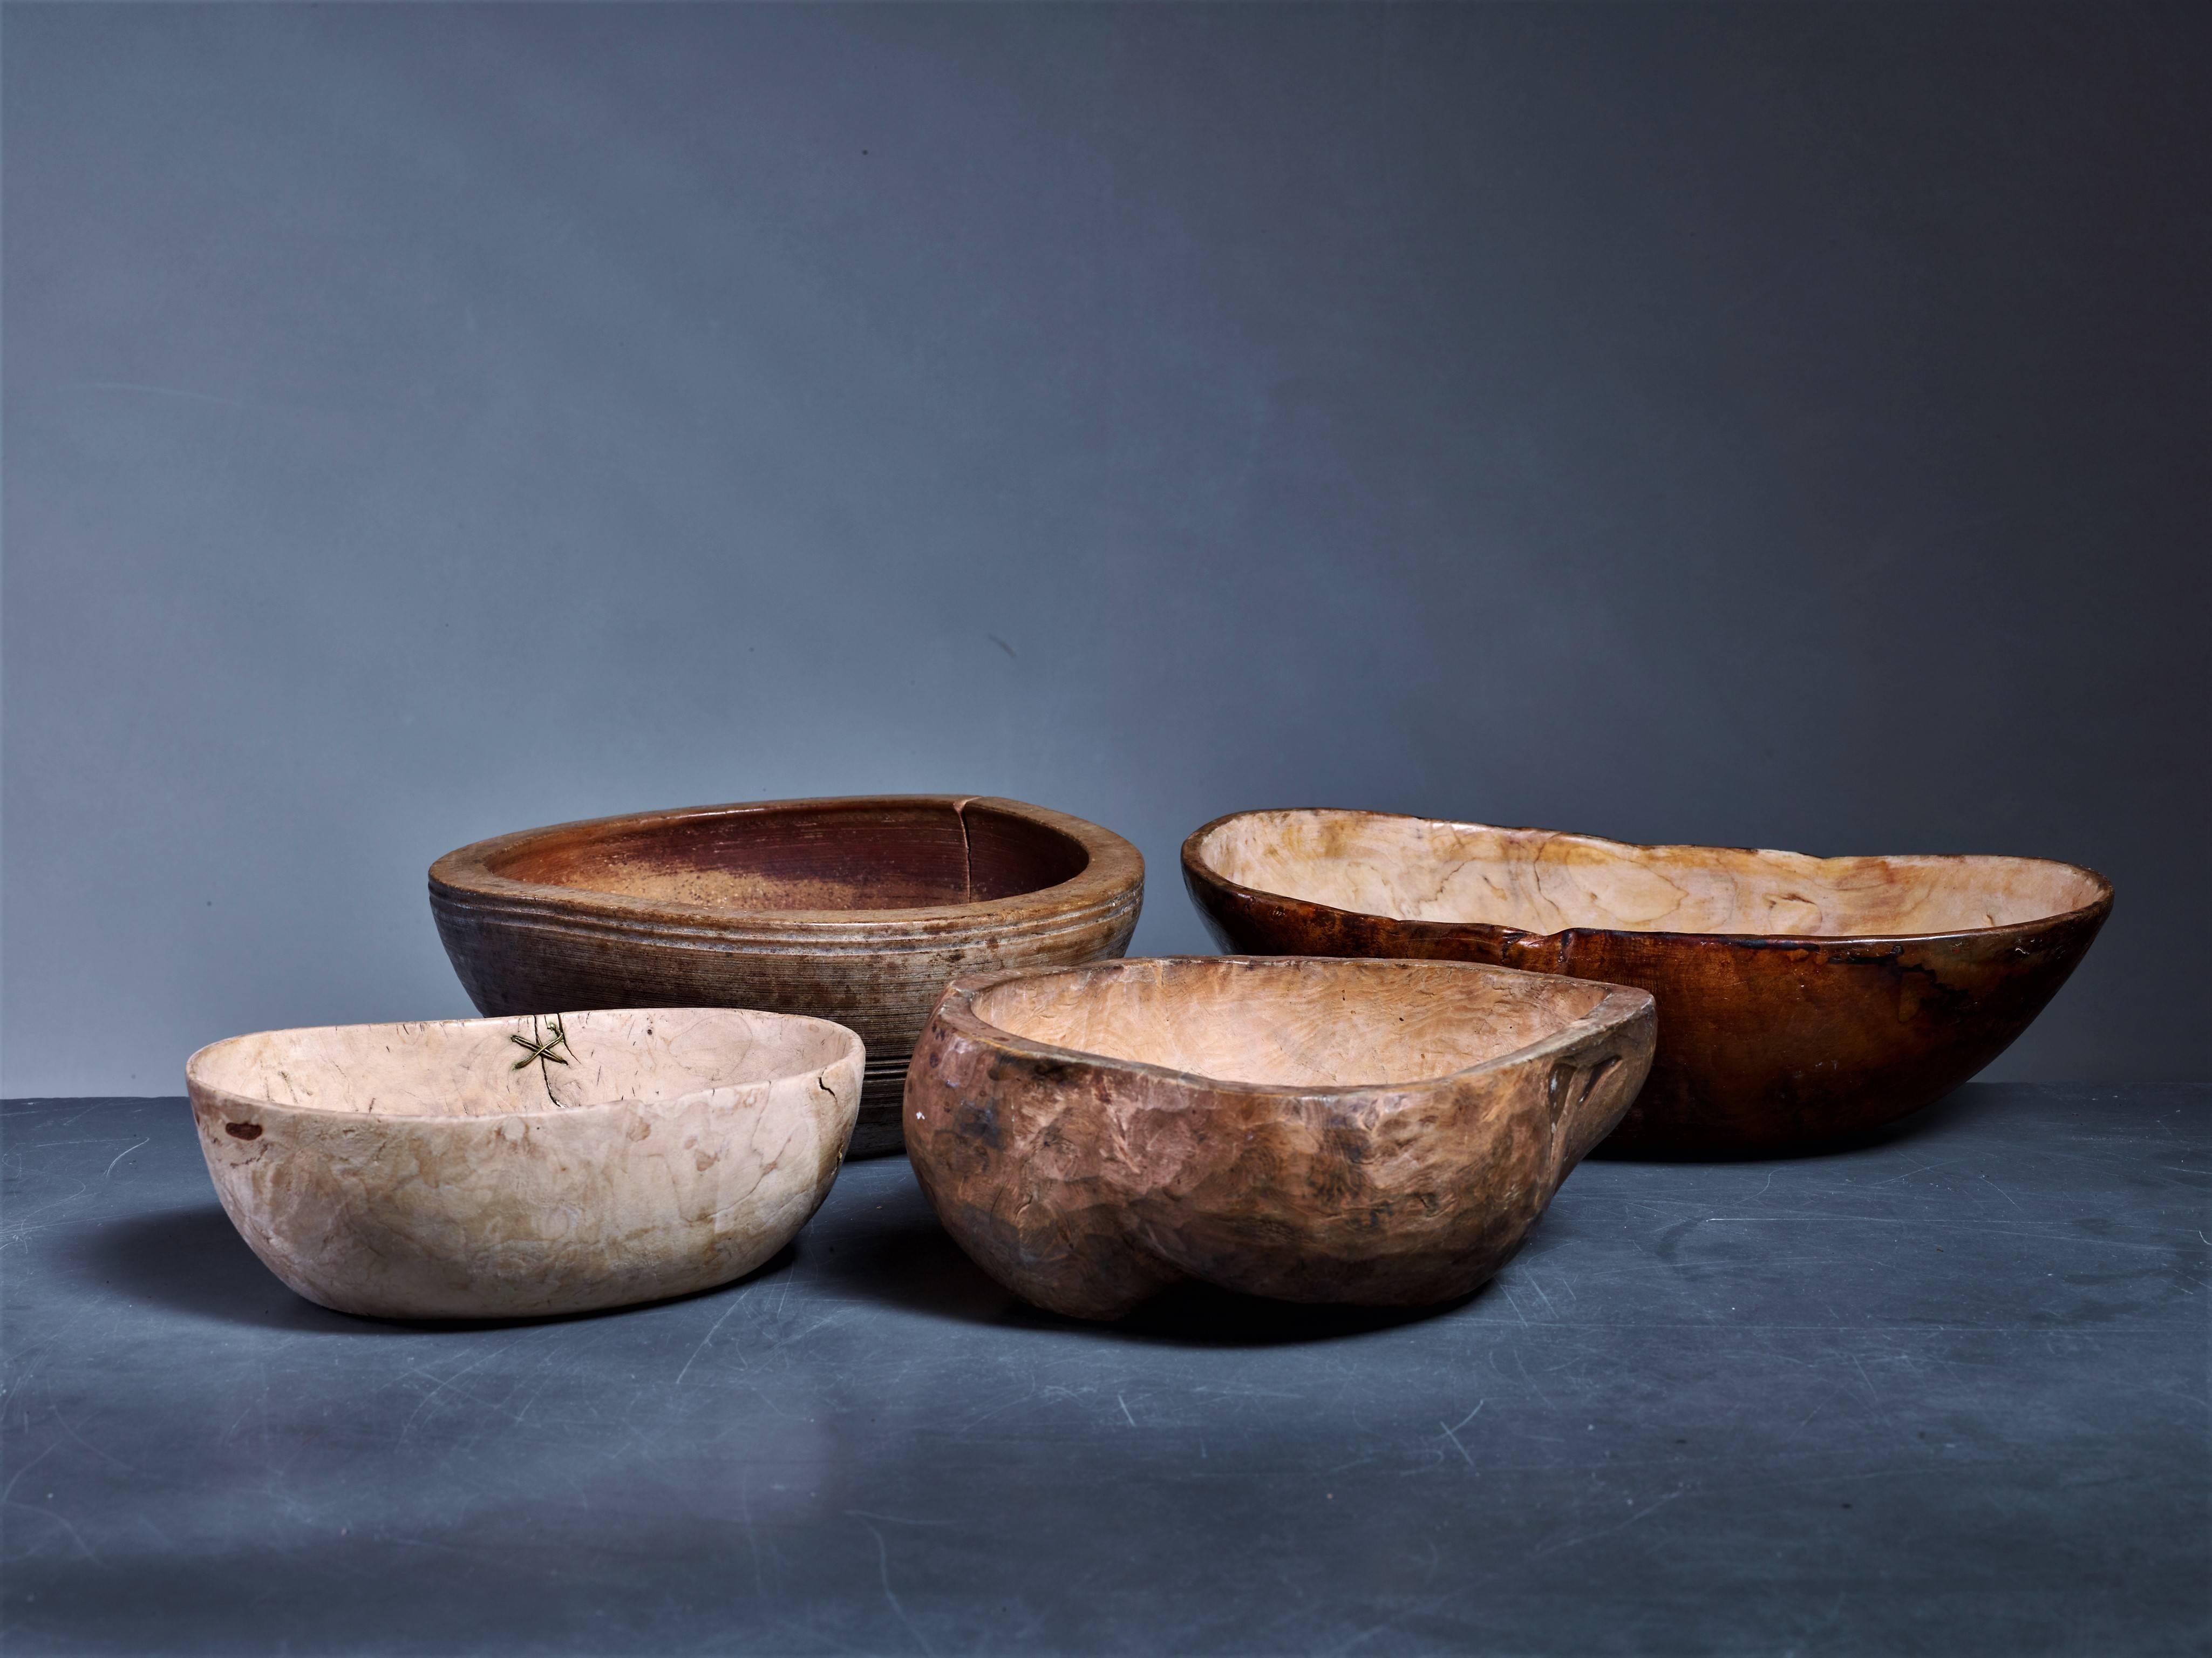 A set of four 19th century Folk Art wooden bowls from Sweden.

The two round bowls have a 23/24 cm (ca. 9 inch) diameter and are 9/10 cm (circa 3.5 inch) high. The other smaller bowl is 20 by 14.5 cm (8 by 5.5 inch) and is 7 cm (2.8 inch) high. The